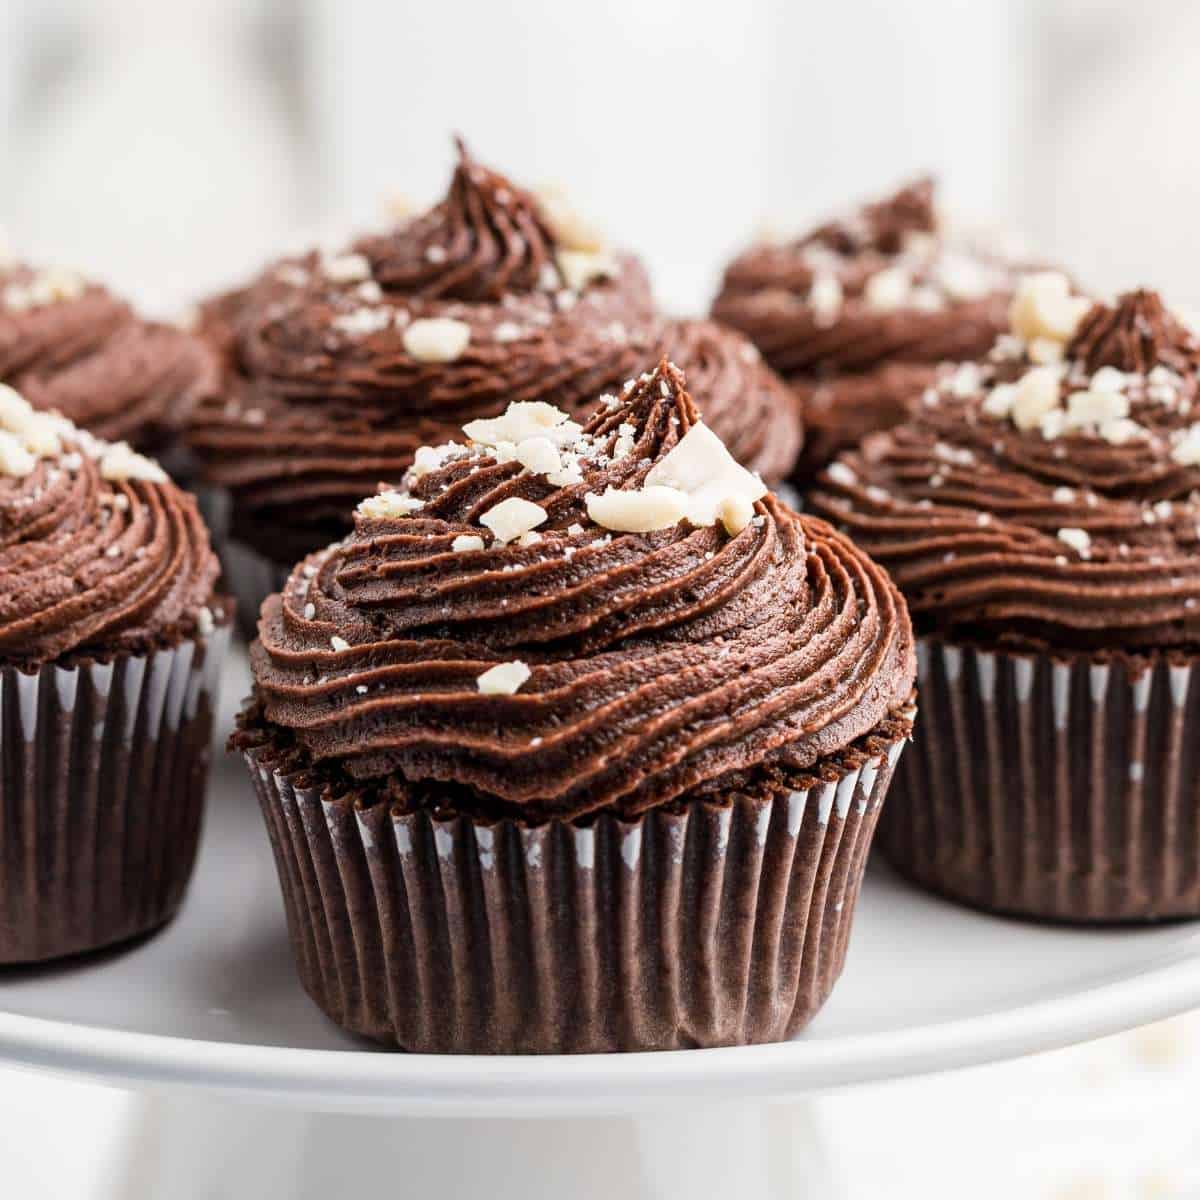 Chocolate Cupcakes With Peanut Butter Frosting